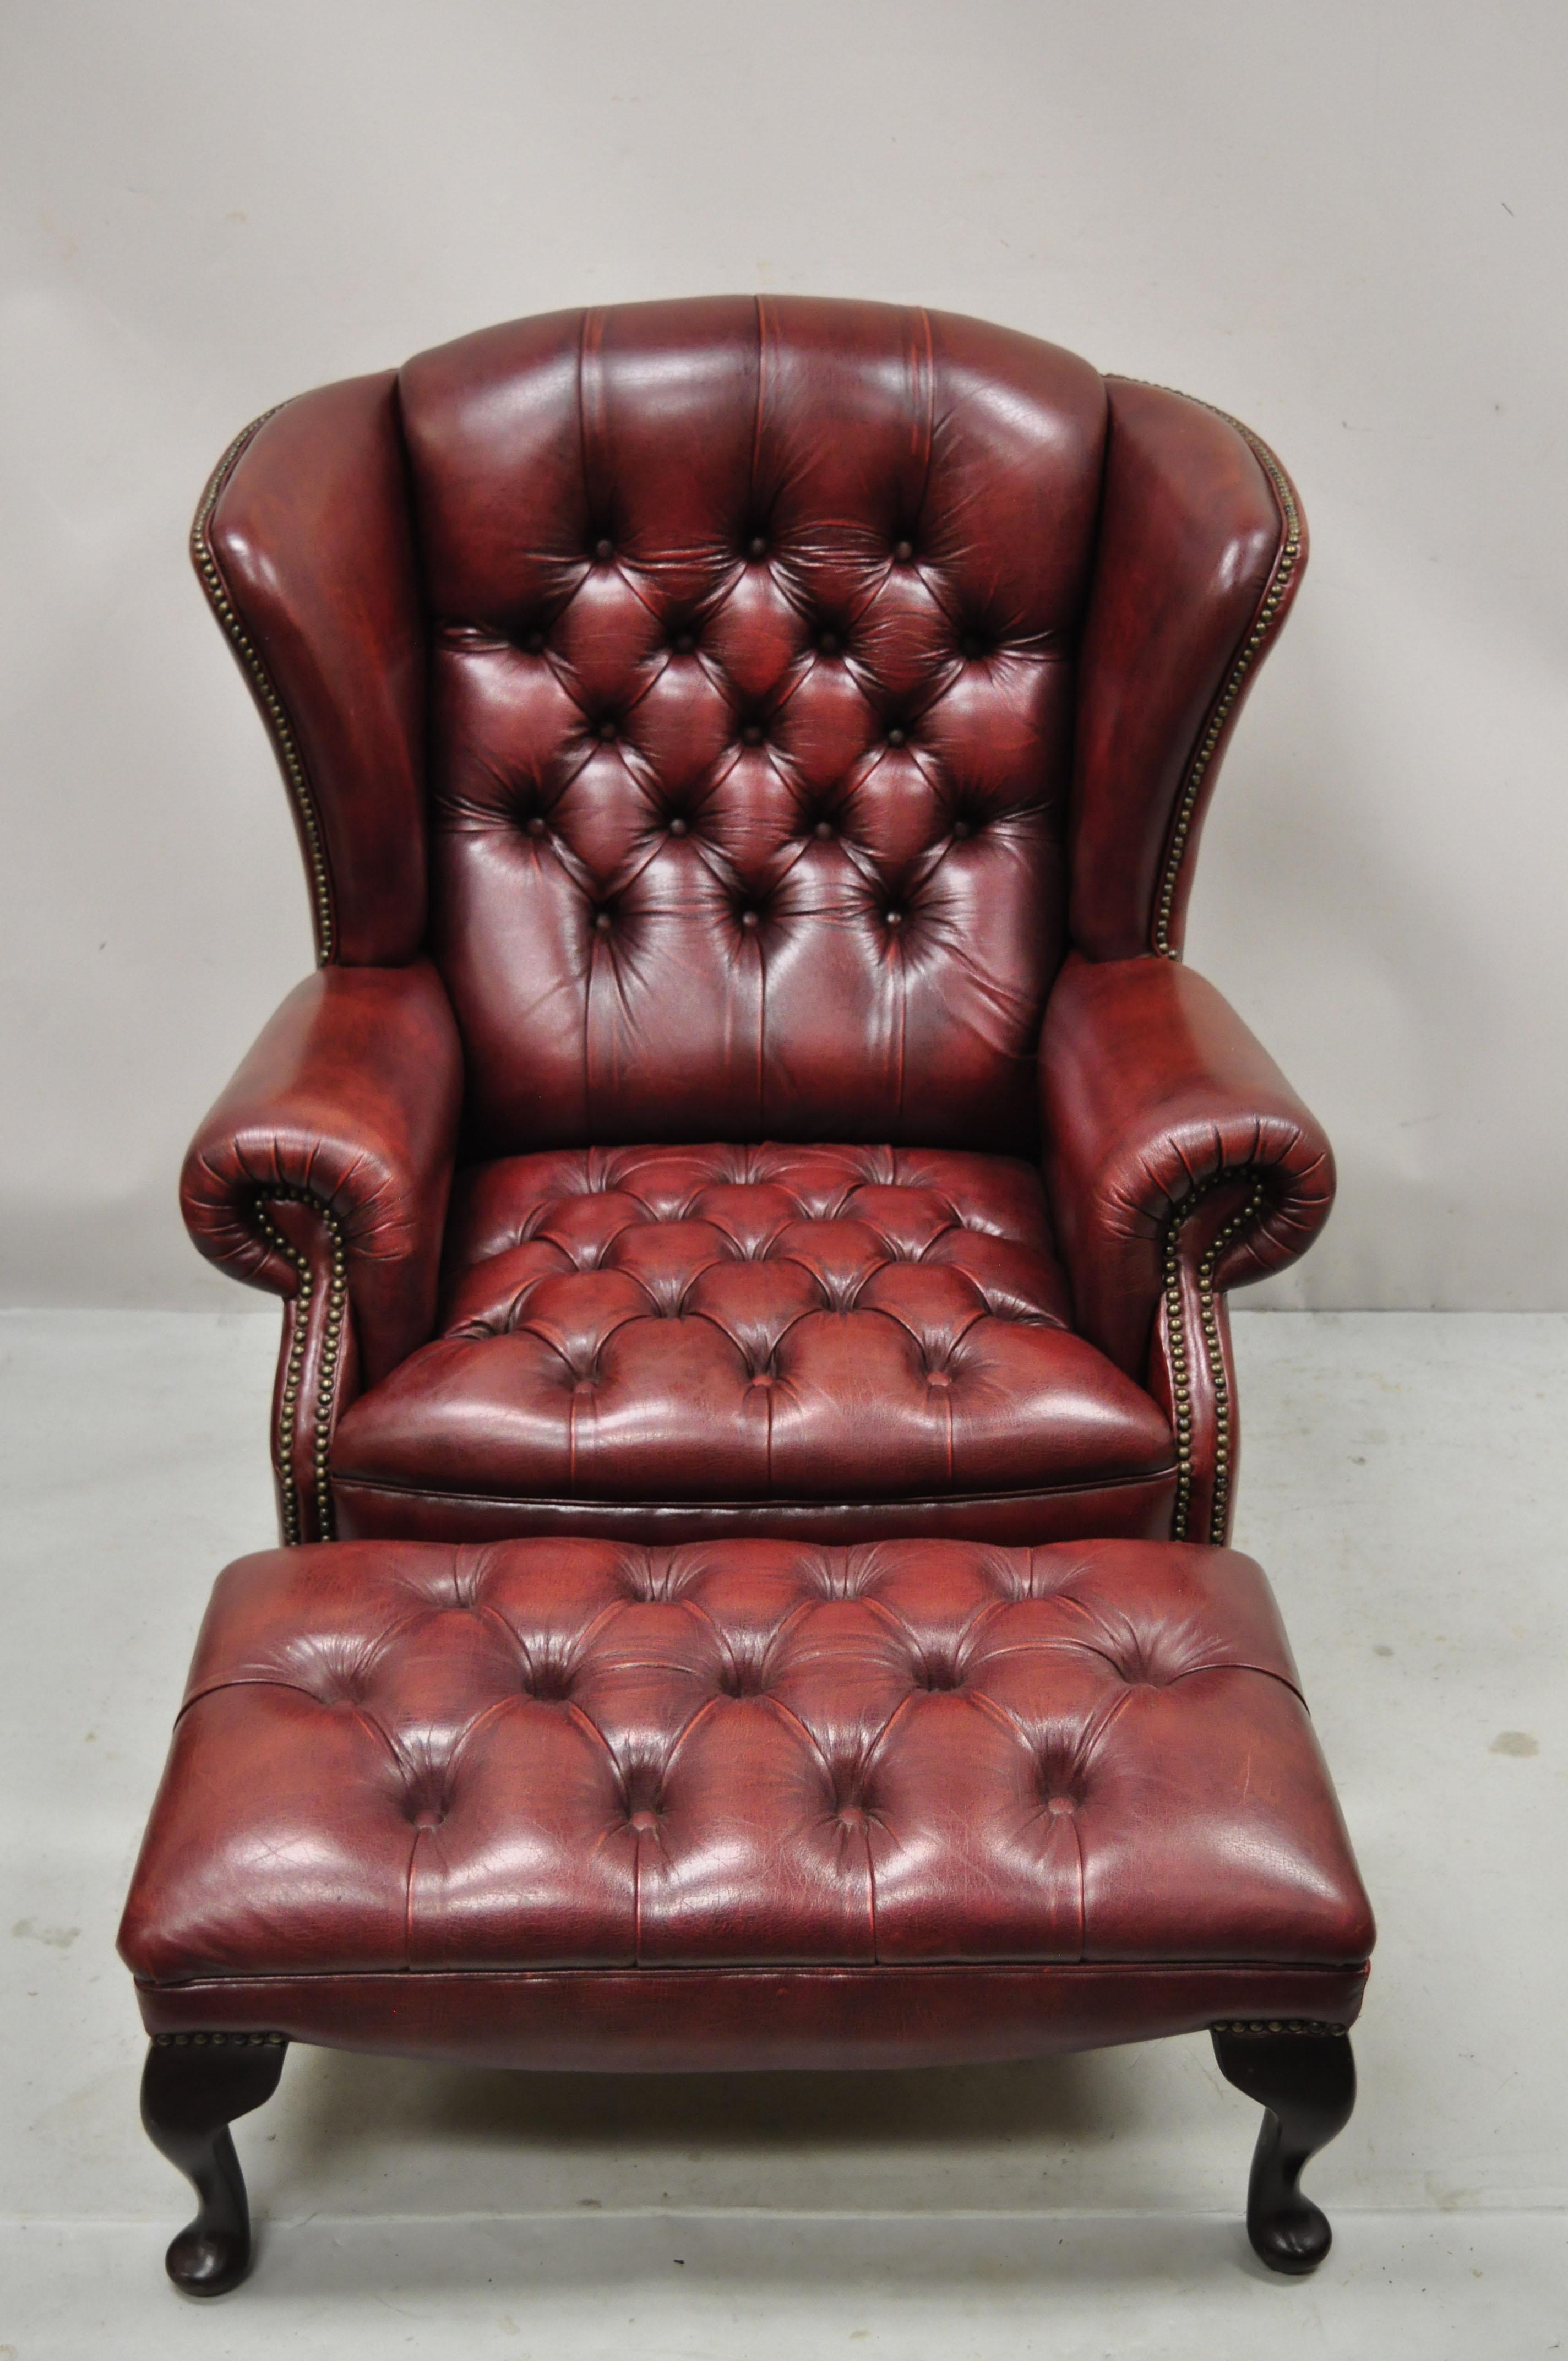 Vintage English Chesterfield Burgundy leather tufted wingback chair and ottoman by Action Furniture Ltd. Set includes chair and matching ottoman included, button tufted burgundy leather upholstery, Queen Anne legs, shapely wingback, original label,